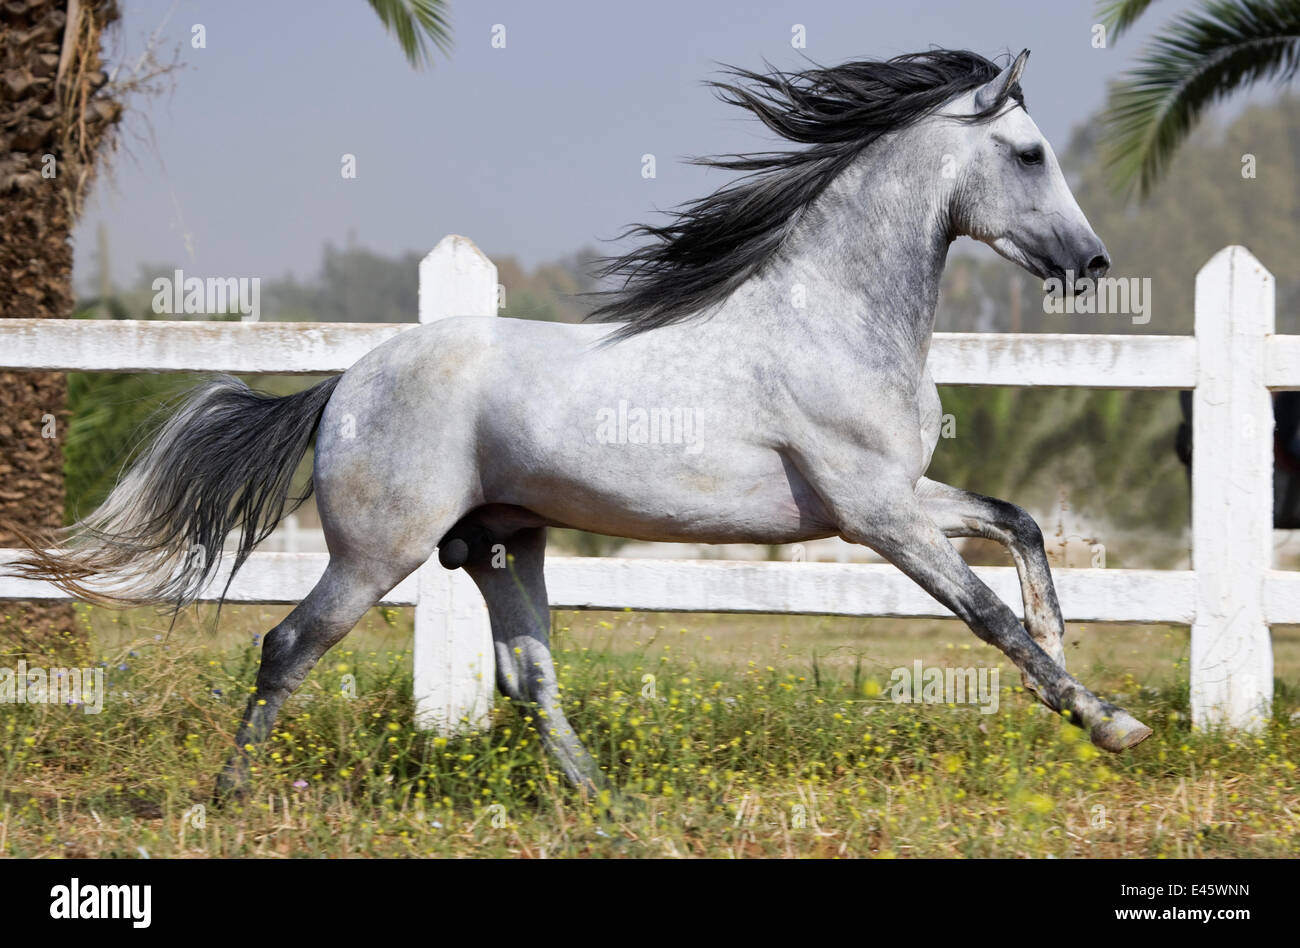 A grey Arab Barb stallion cantering in paddock at the National Stud of Meknes, Morocco, June 2010 Stock Photo